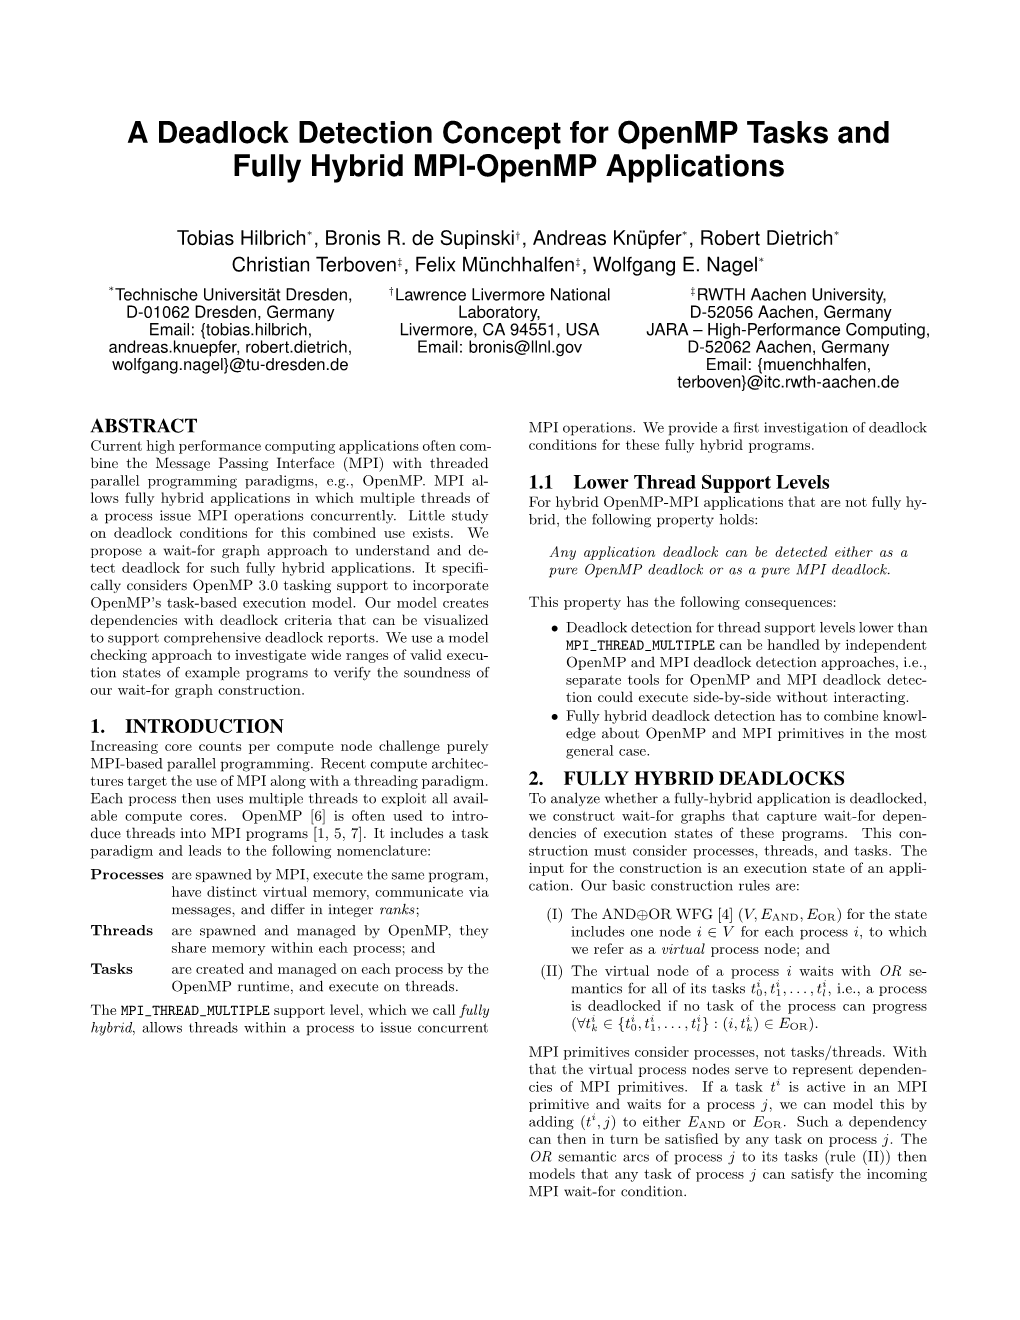 A Deadlock Detection Concept for Openmp Tasks and Fully Hybrid MPI-Openmp Applications